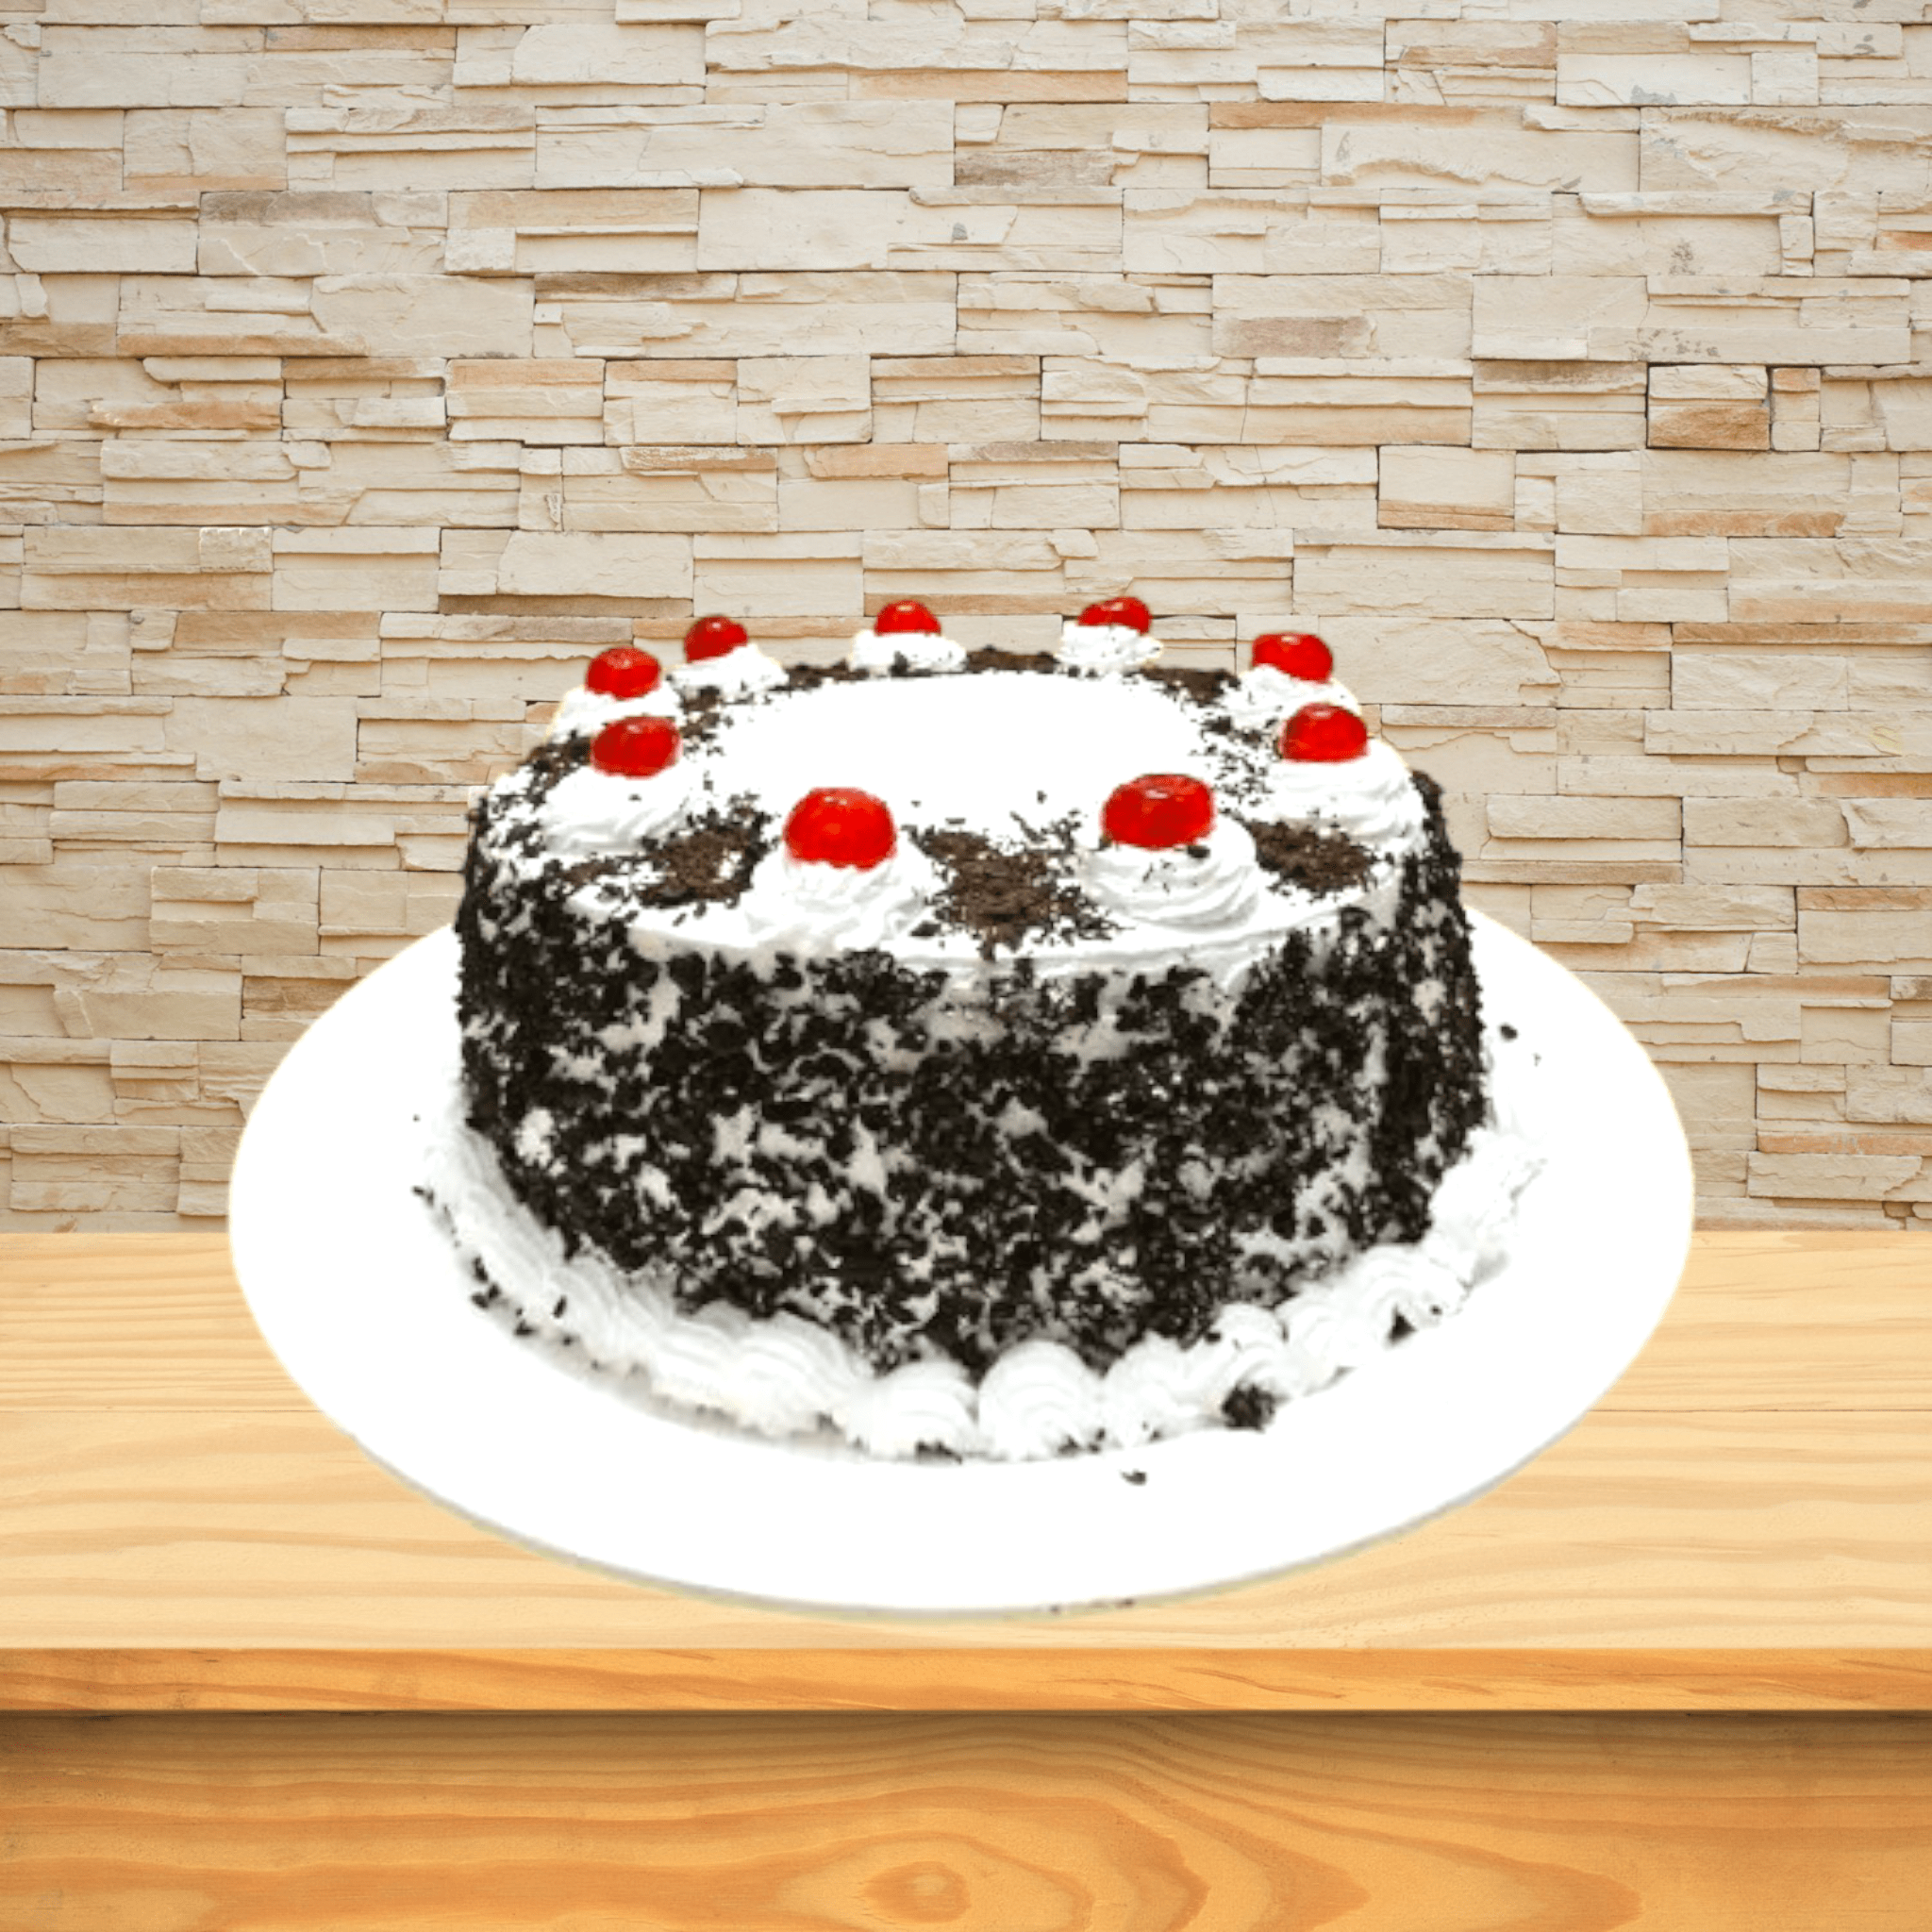 Black Forest Cake Mix (250g) in Ernakulam at best price by GRAIN N GRACE  FOOD INGREDIENTS MANUFACTURING PVT. LTD. - Justdial